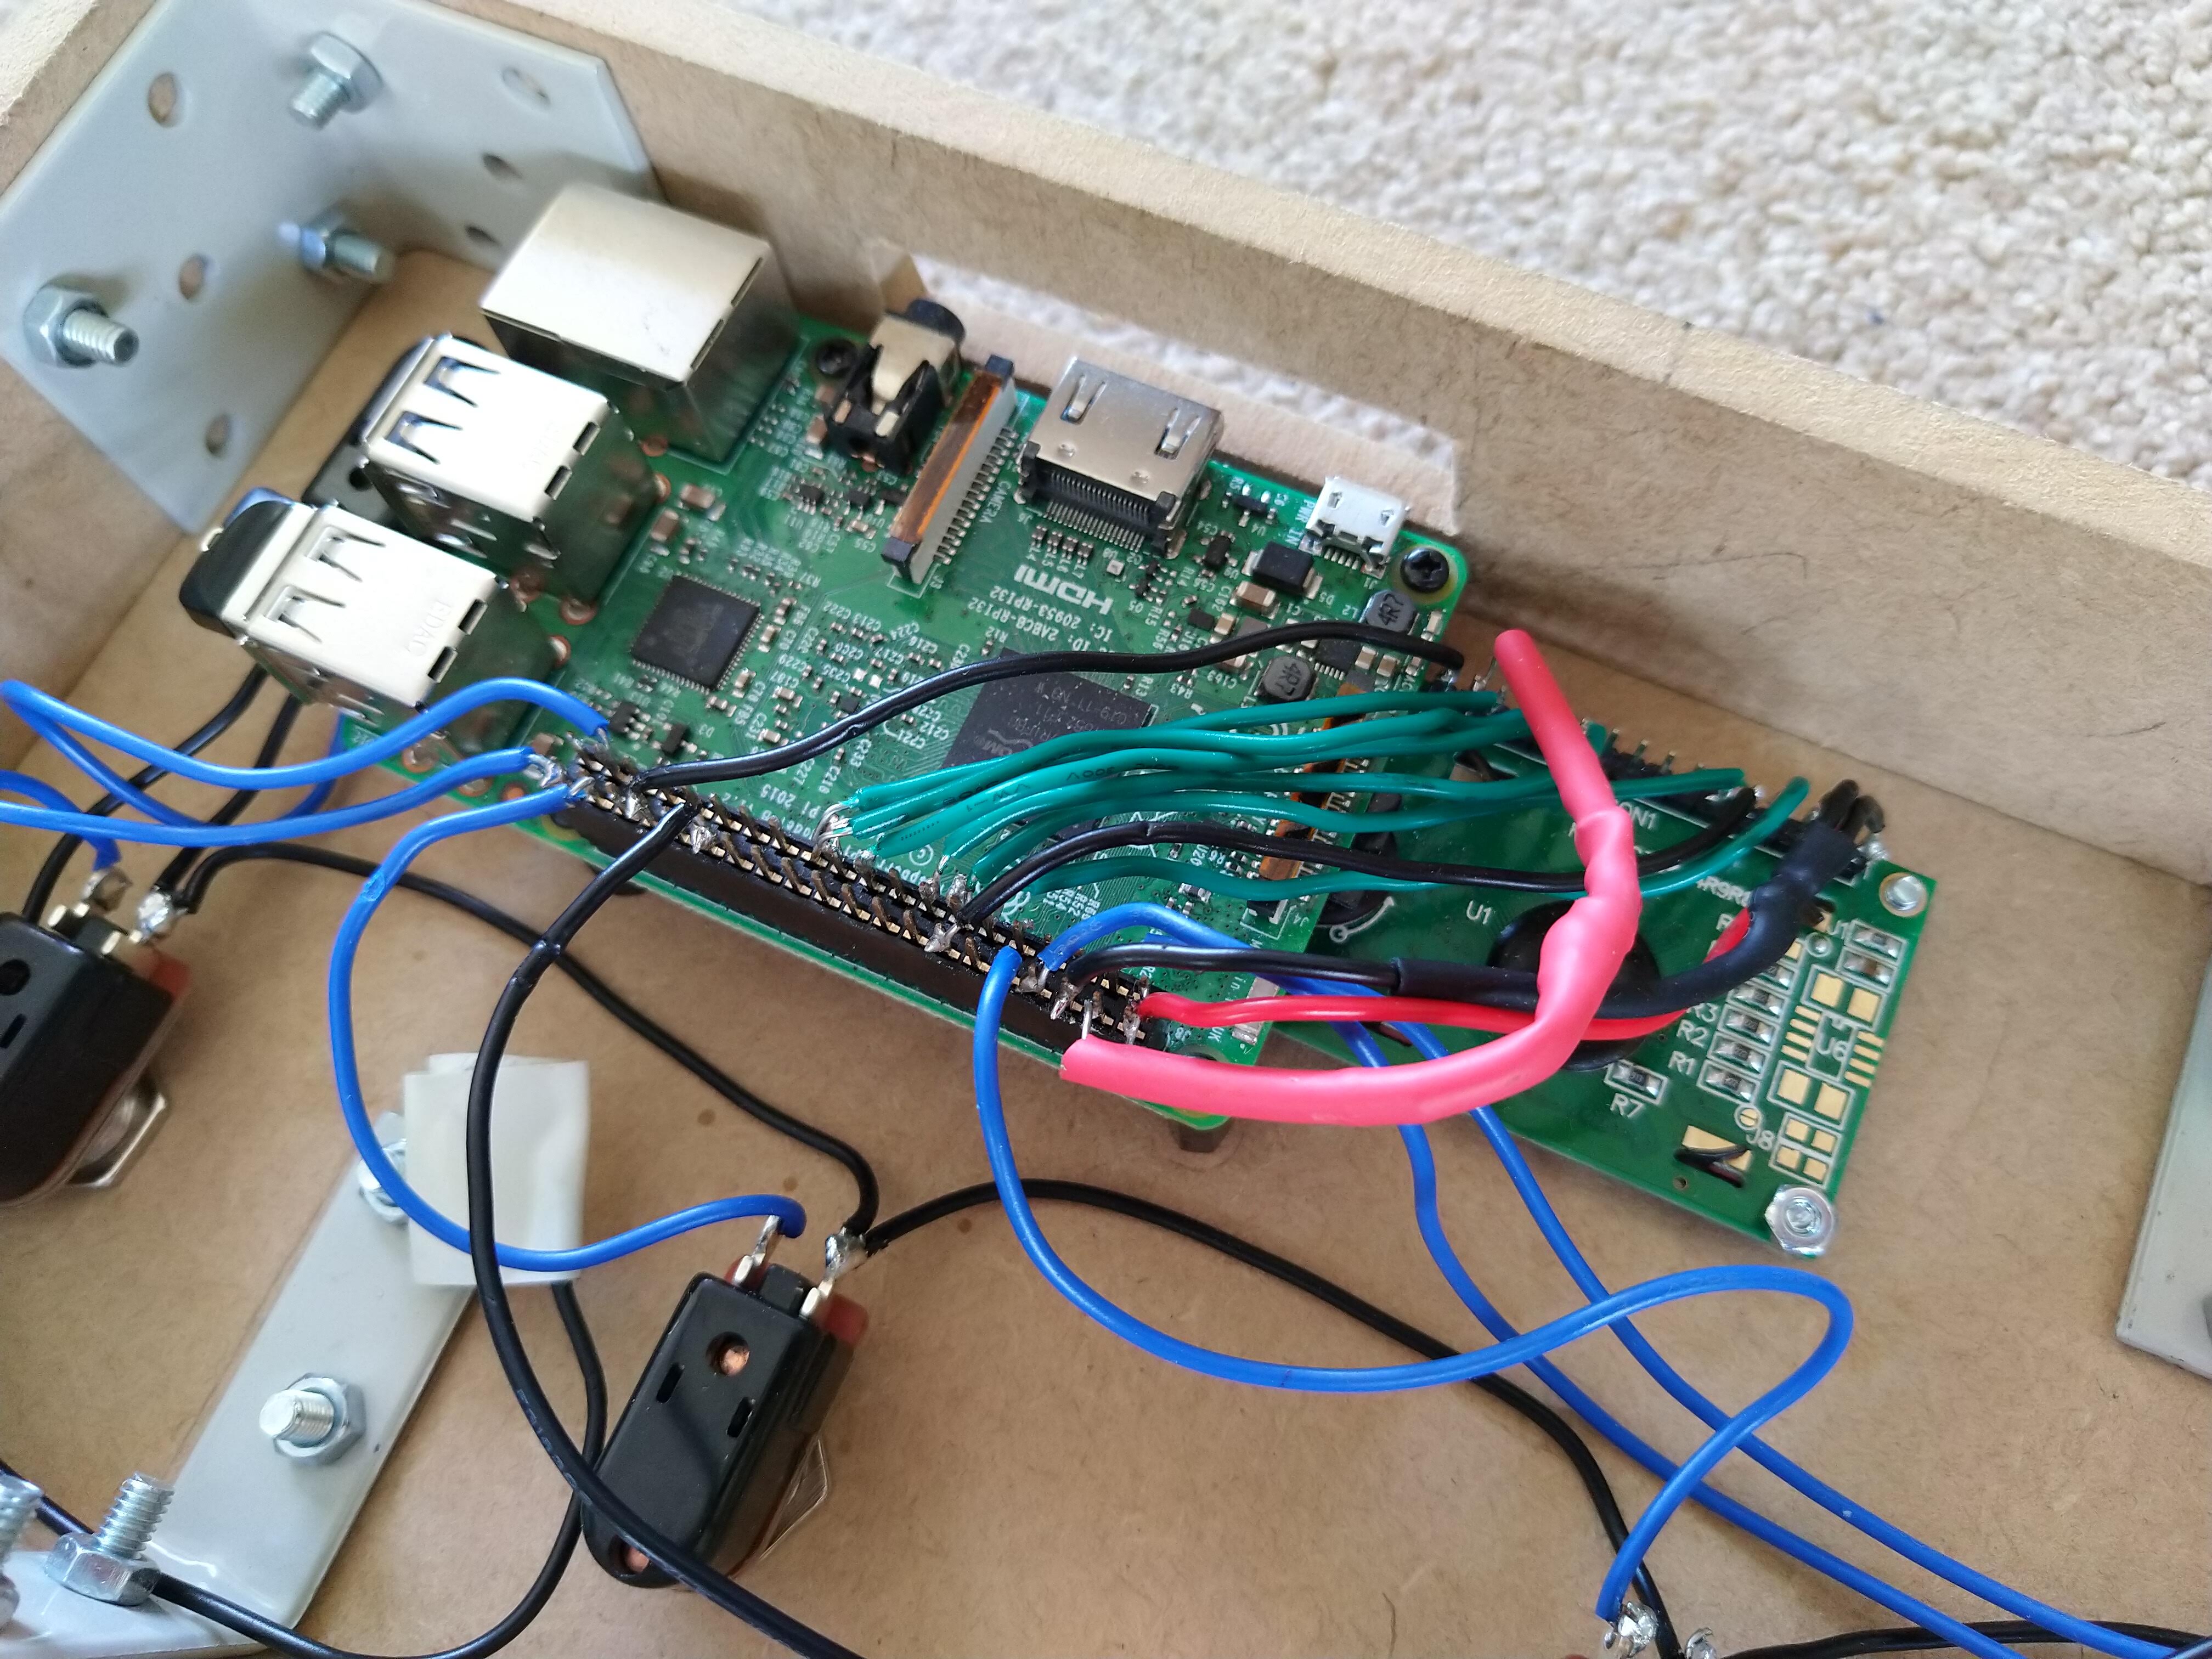 A Raspberry Pi connected by various soldered wires to an LCD screen. Both components are installed into the lid of the SoundFloored pedal